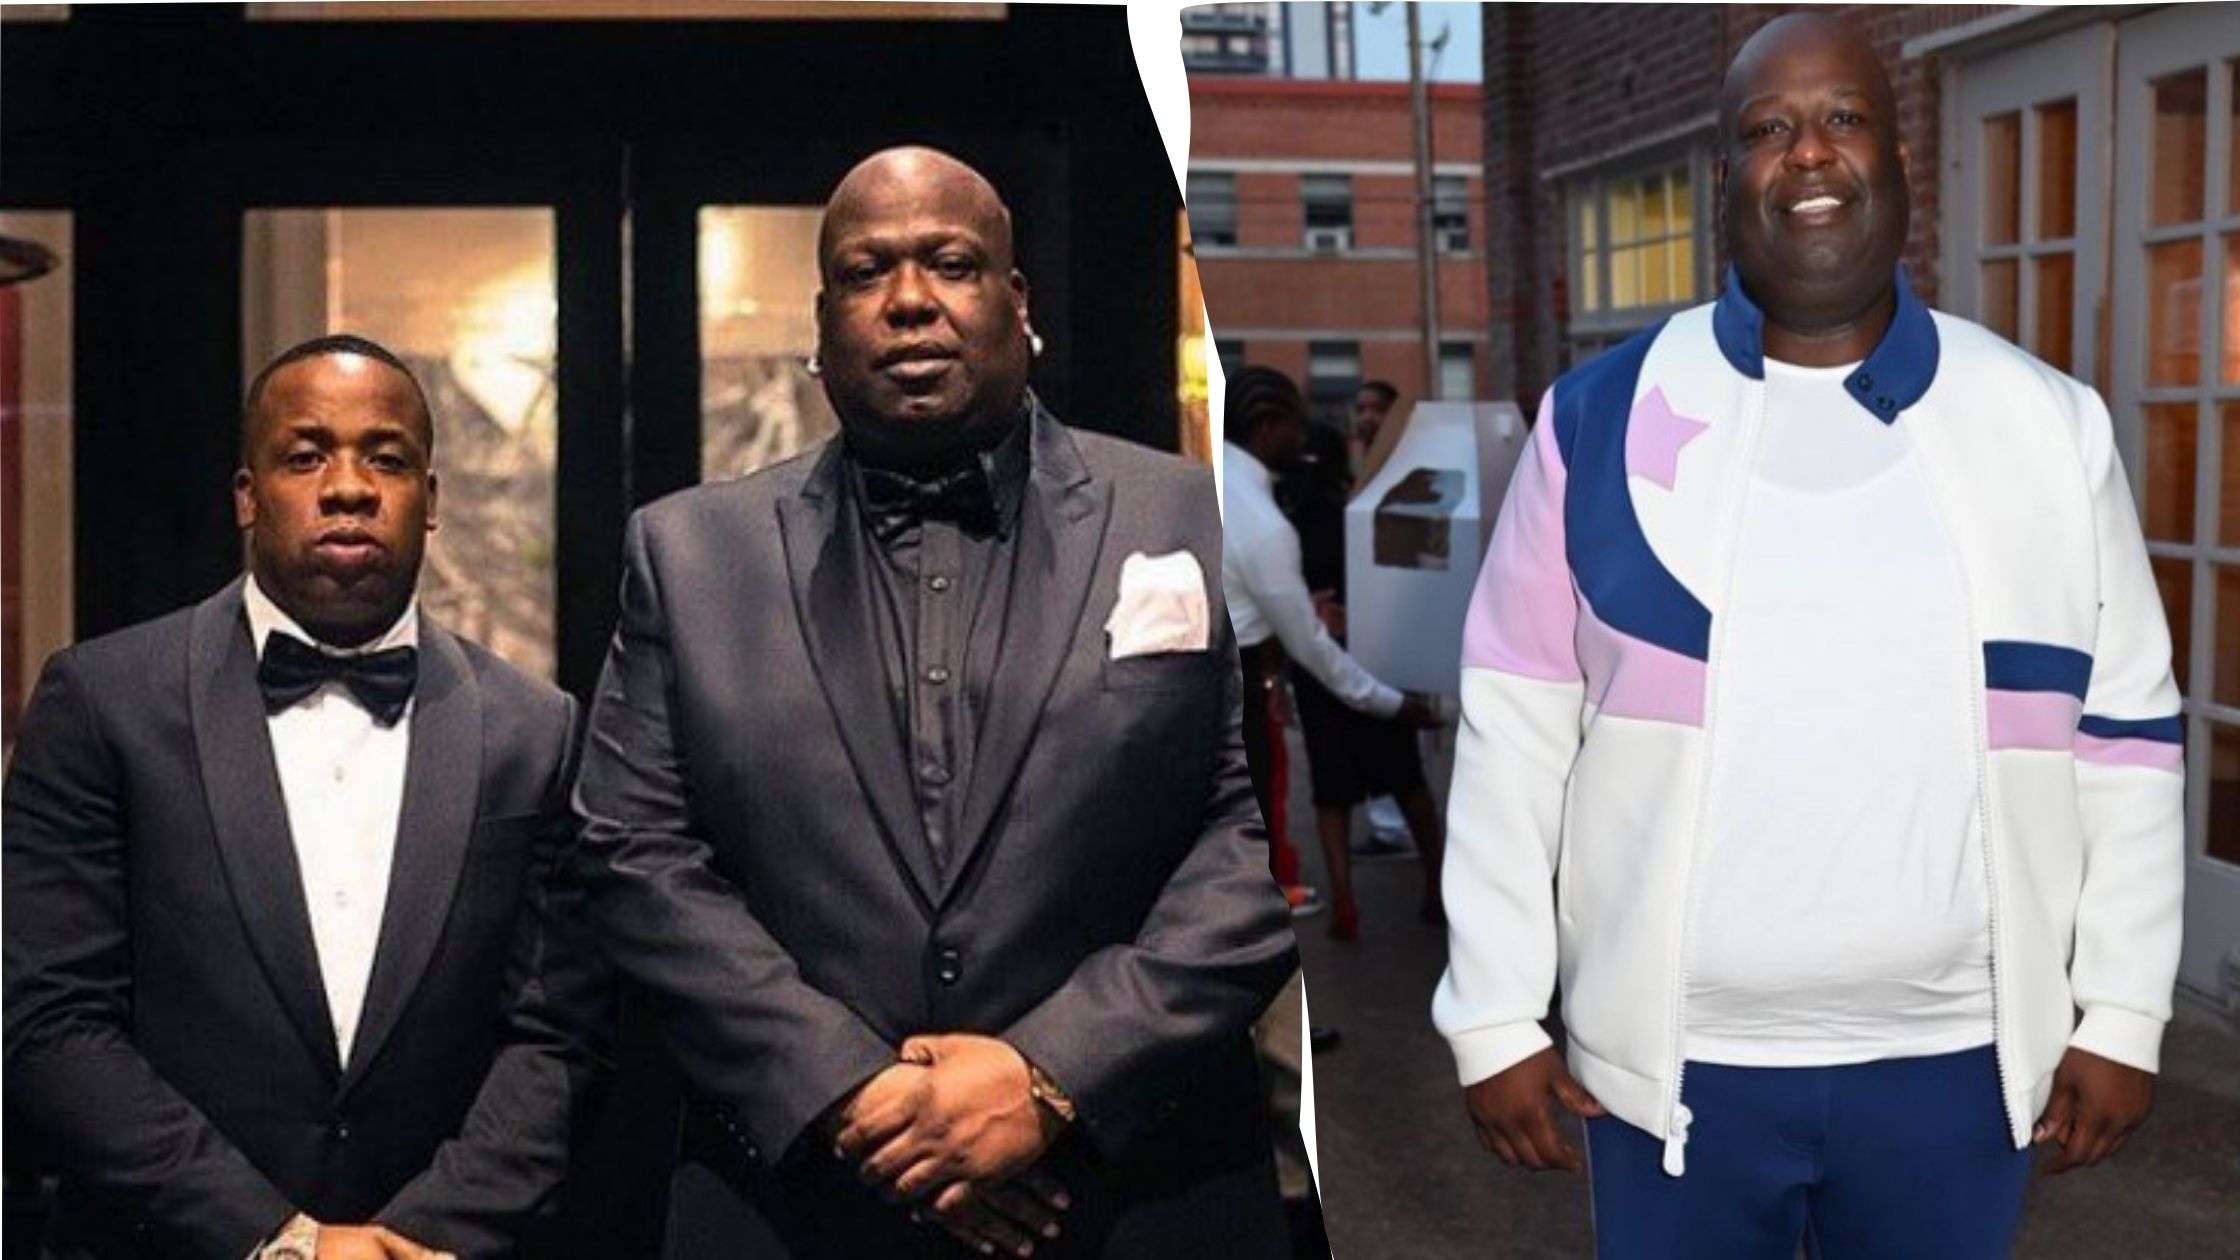 Yo Gotti’s brother 'Big Jook' killed in Memphis After Funeral Service 